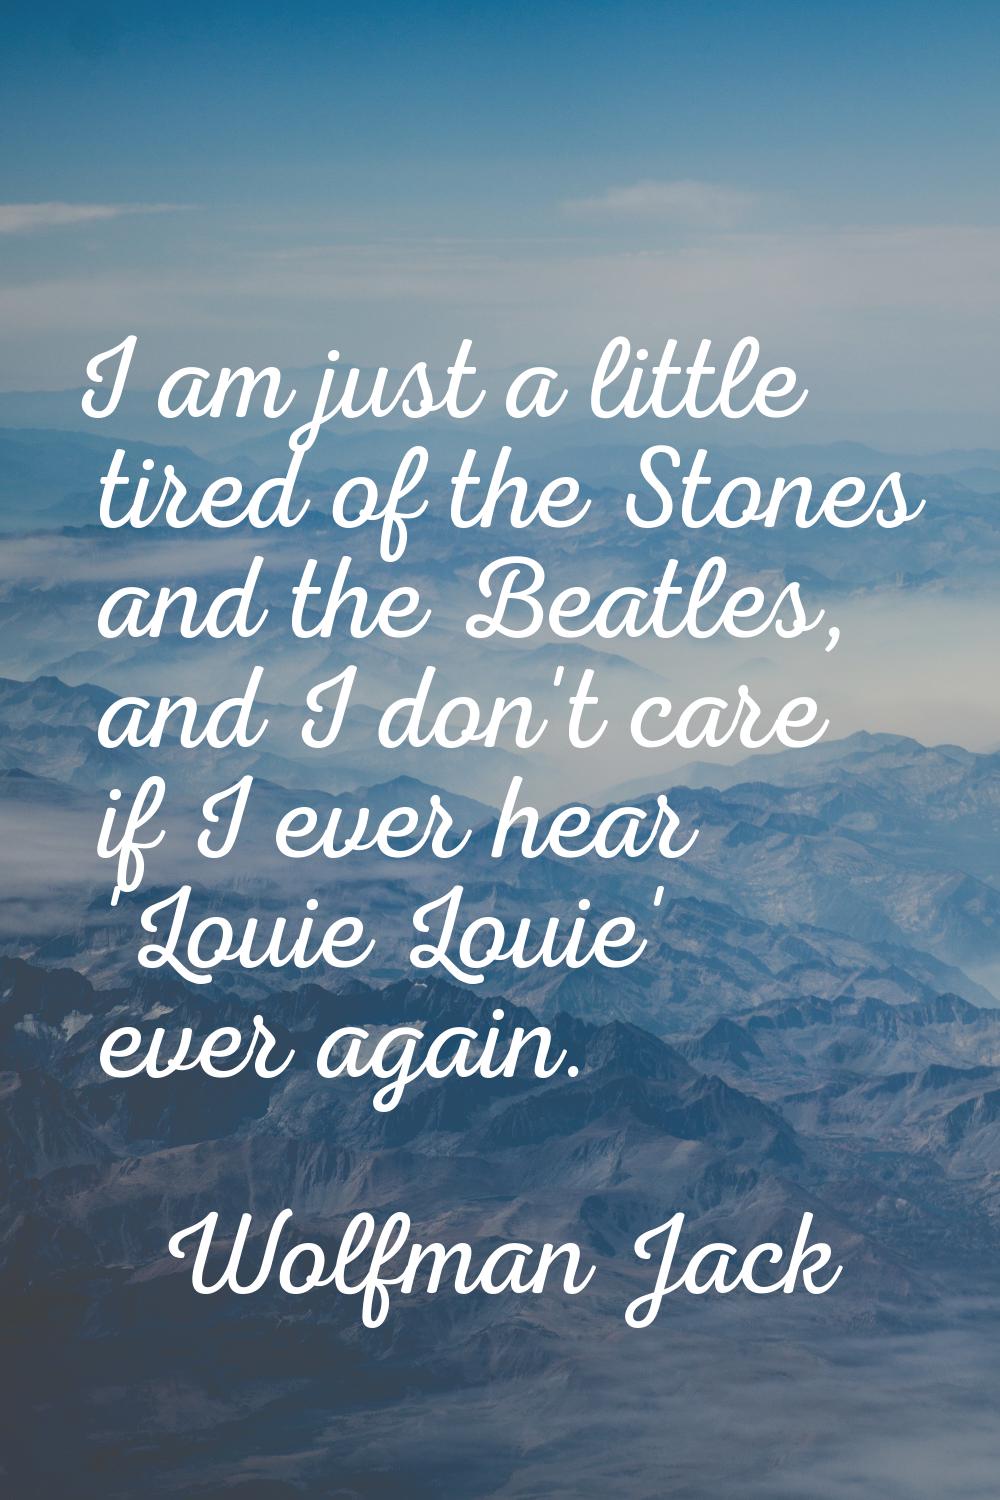 I am just a little tired of the Stones and the Beatles, and I don't care if I ever hear 'Louie Loui